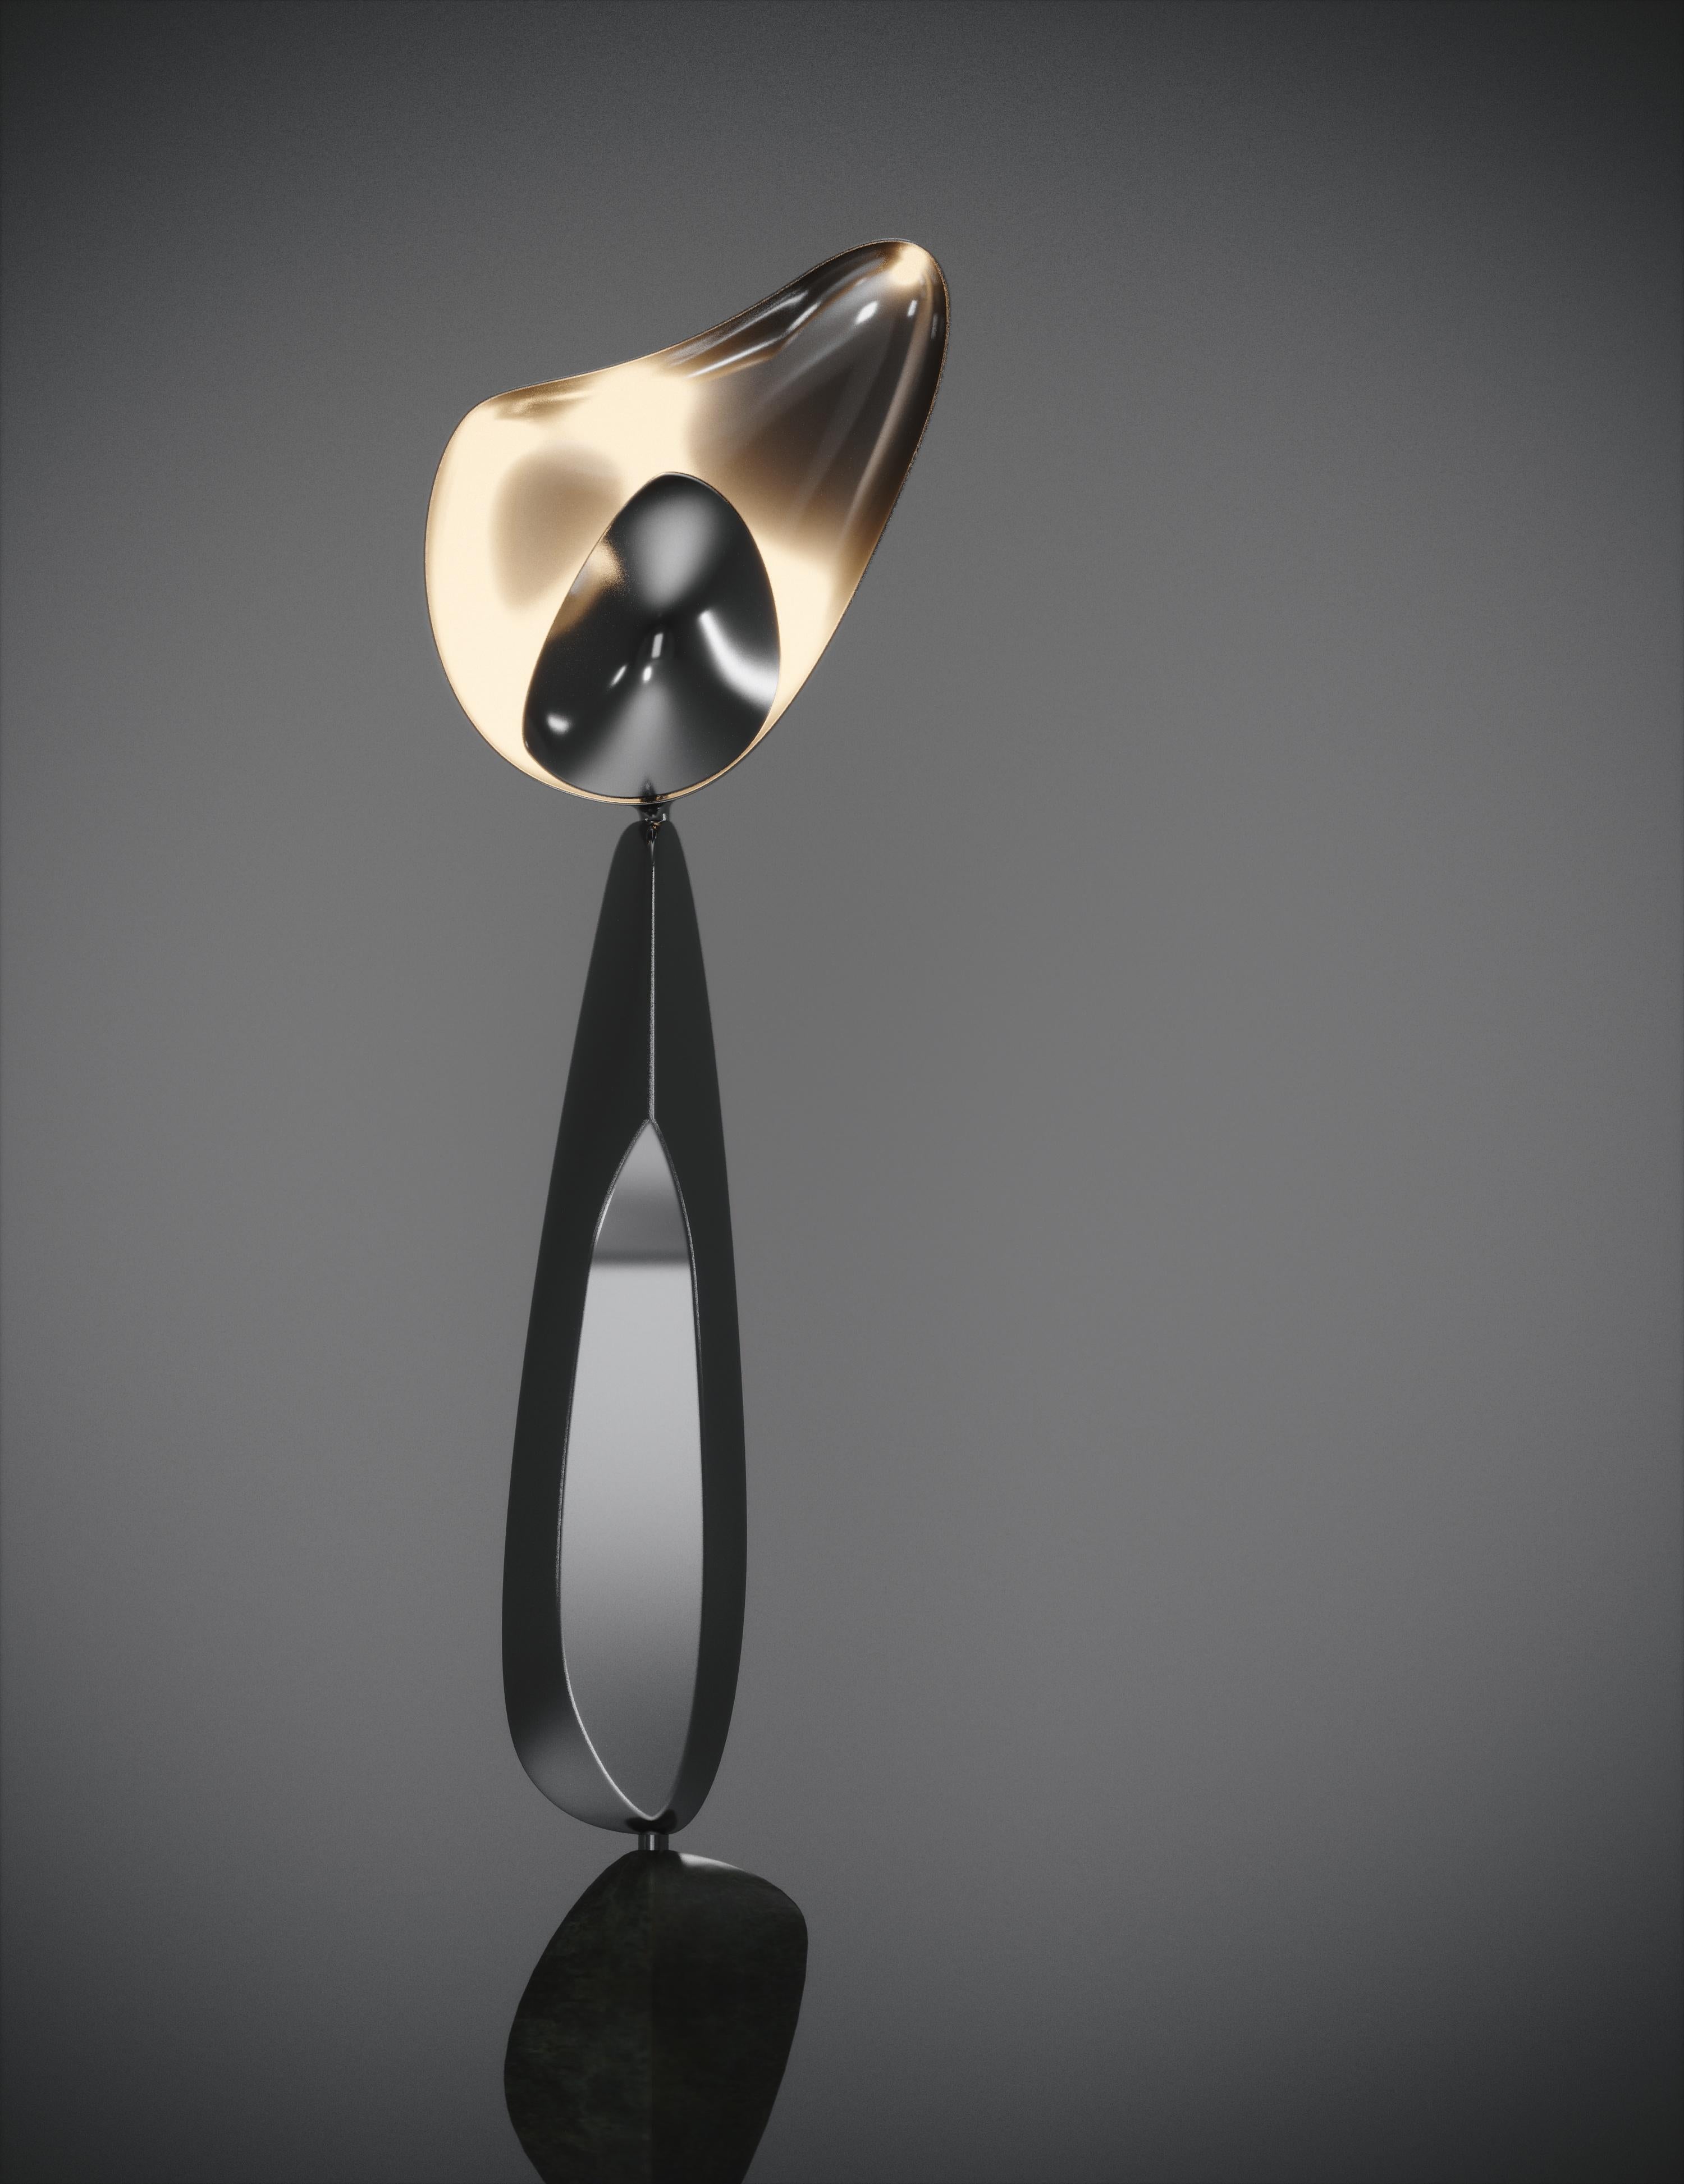 The Cosmo Moon floor lamp by Kifu Paris is a whimsical and sculptural piece, inlaid in a chrome finish polished stainless steel with black pen shell inlay; creating a vintage feel to the piece. The amorphous shapes are an abstract and poetic